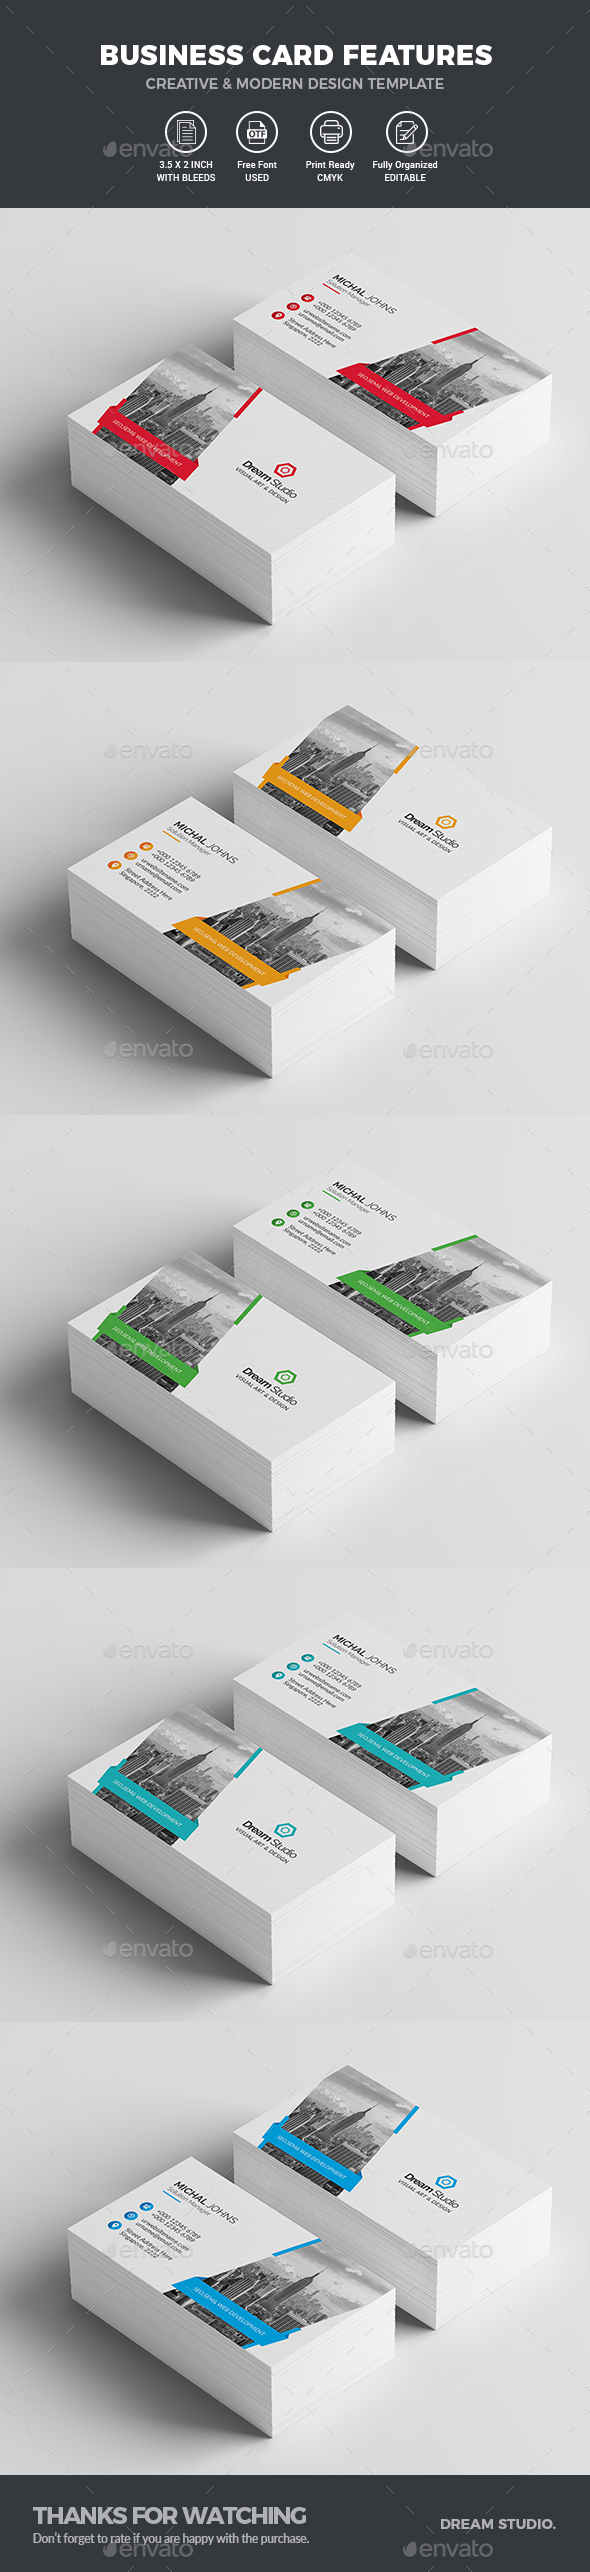 GraphicRiver Business Cards 20904617